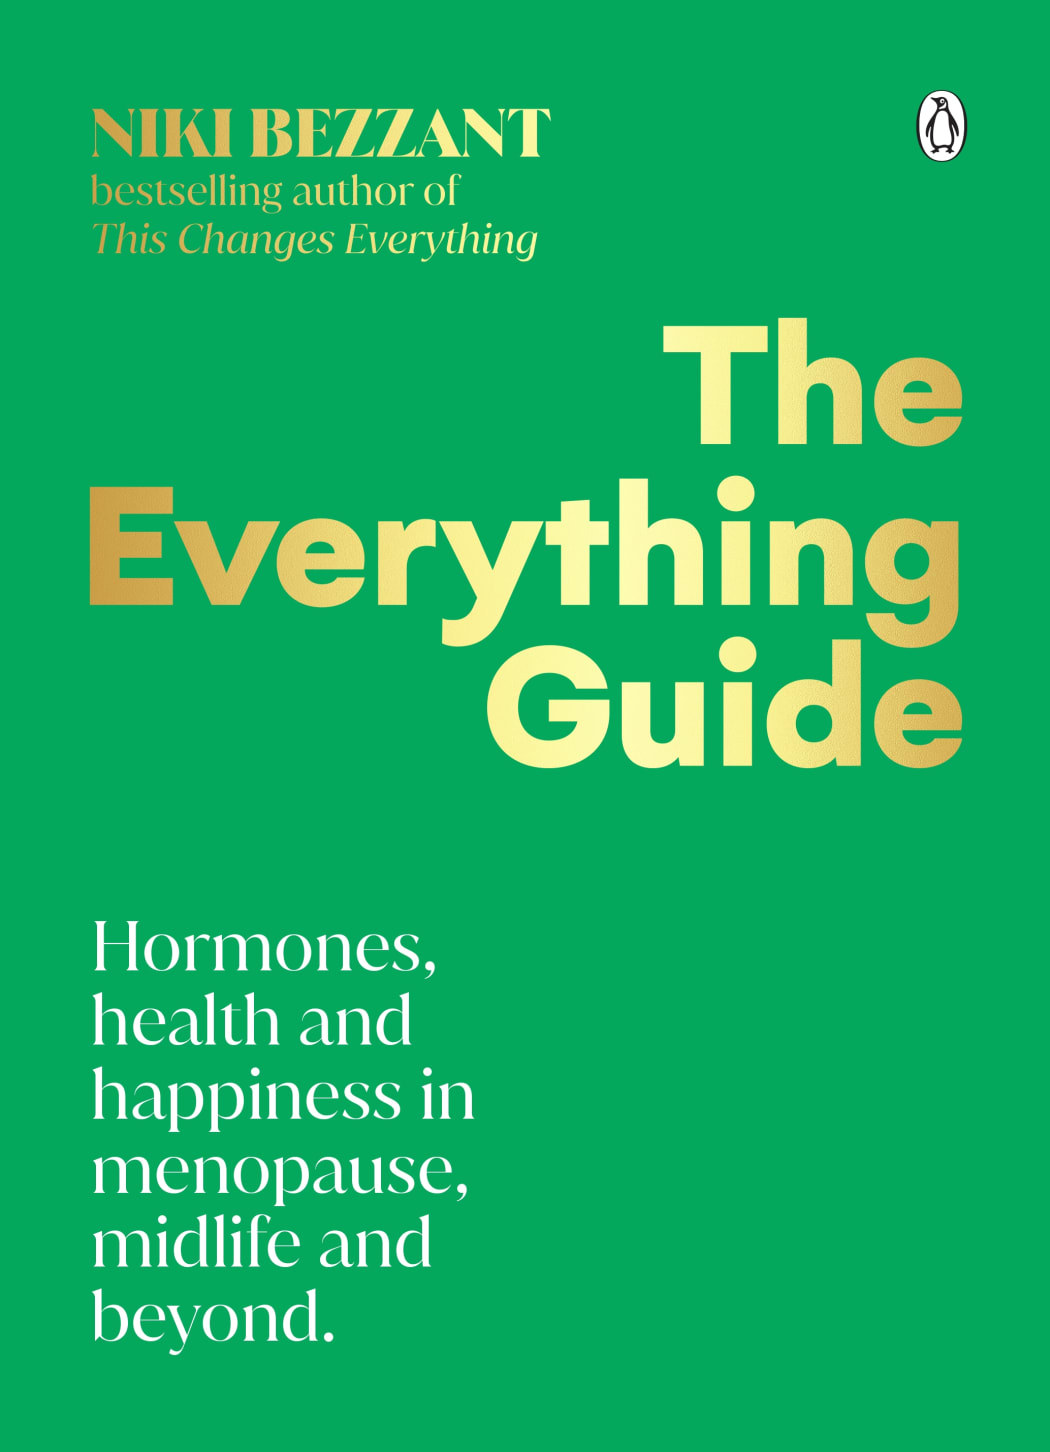 Everything Guide book cover